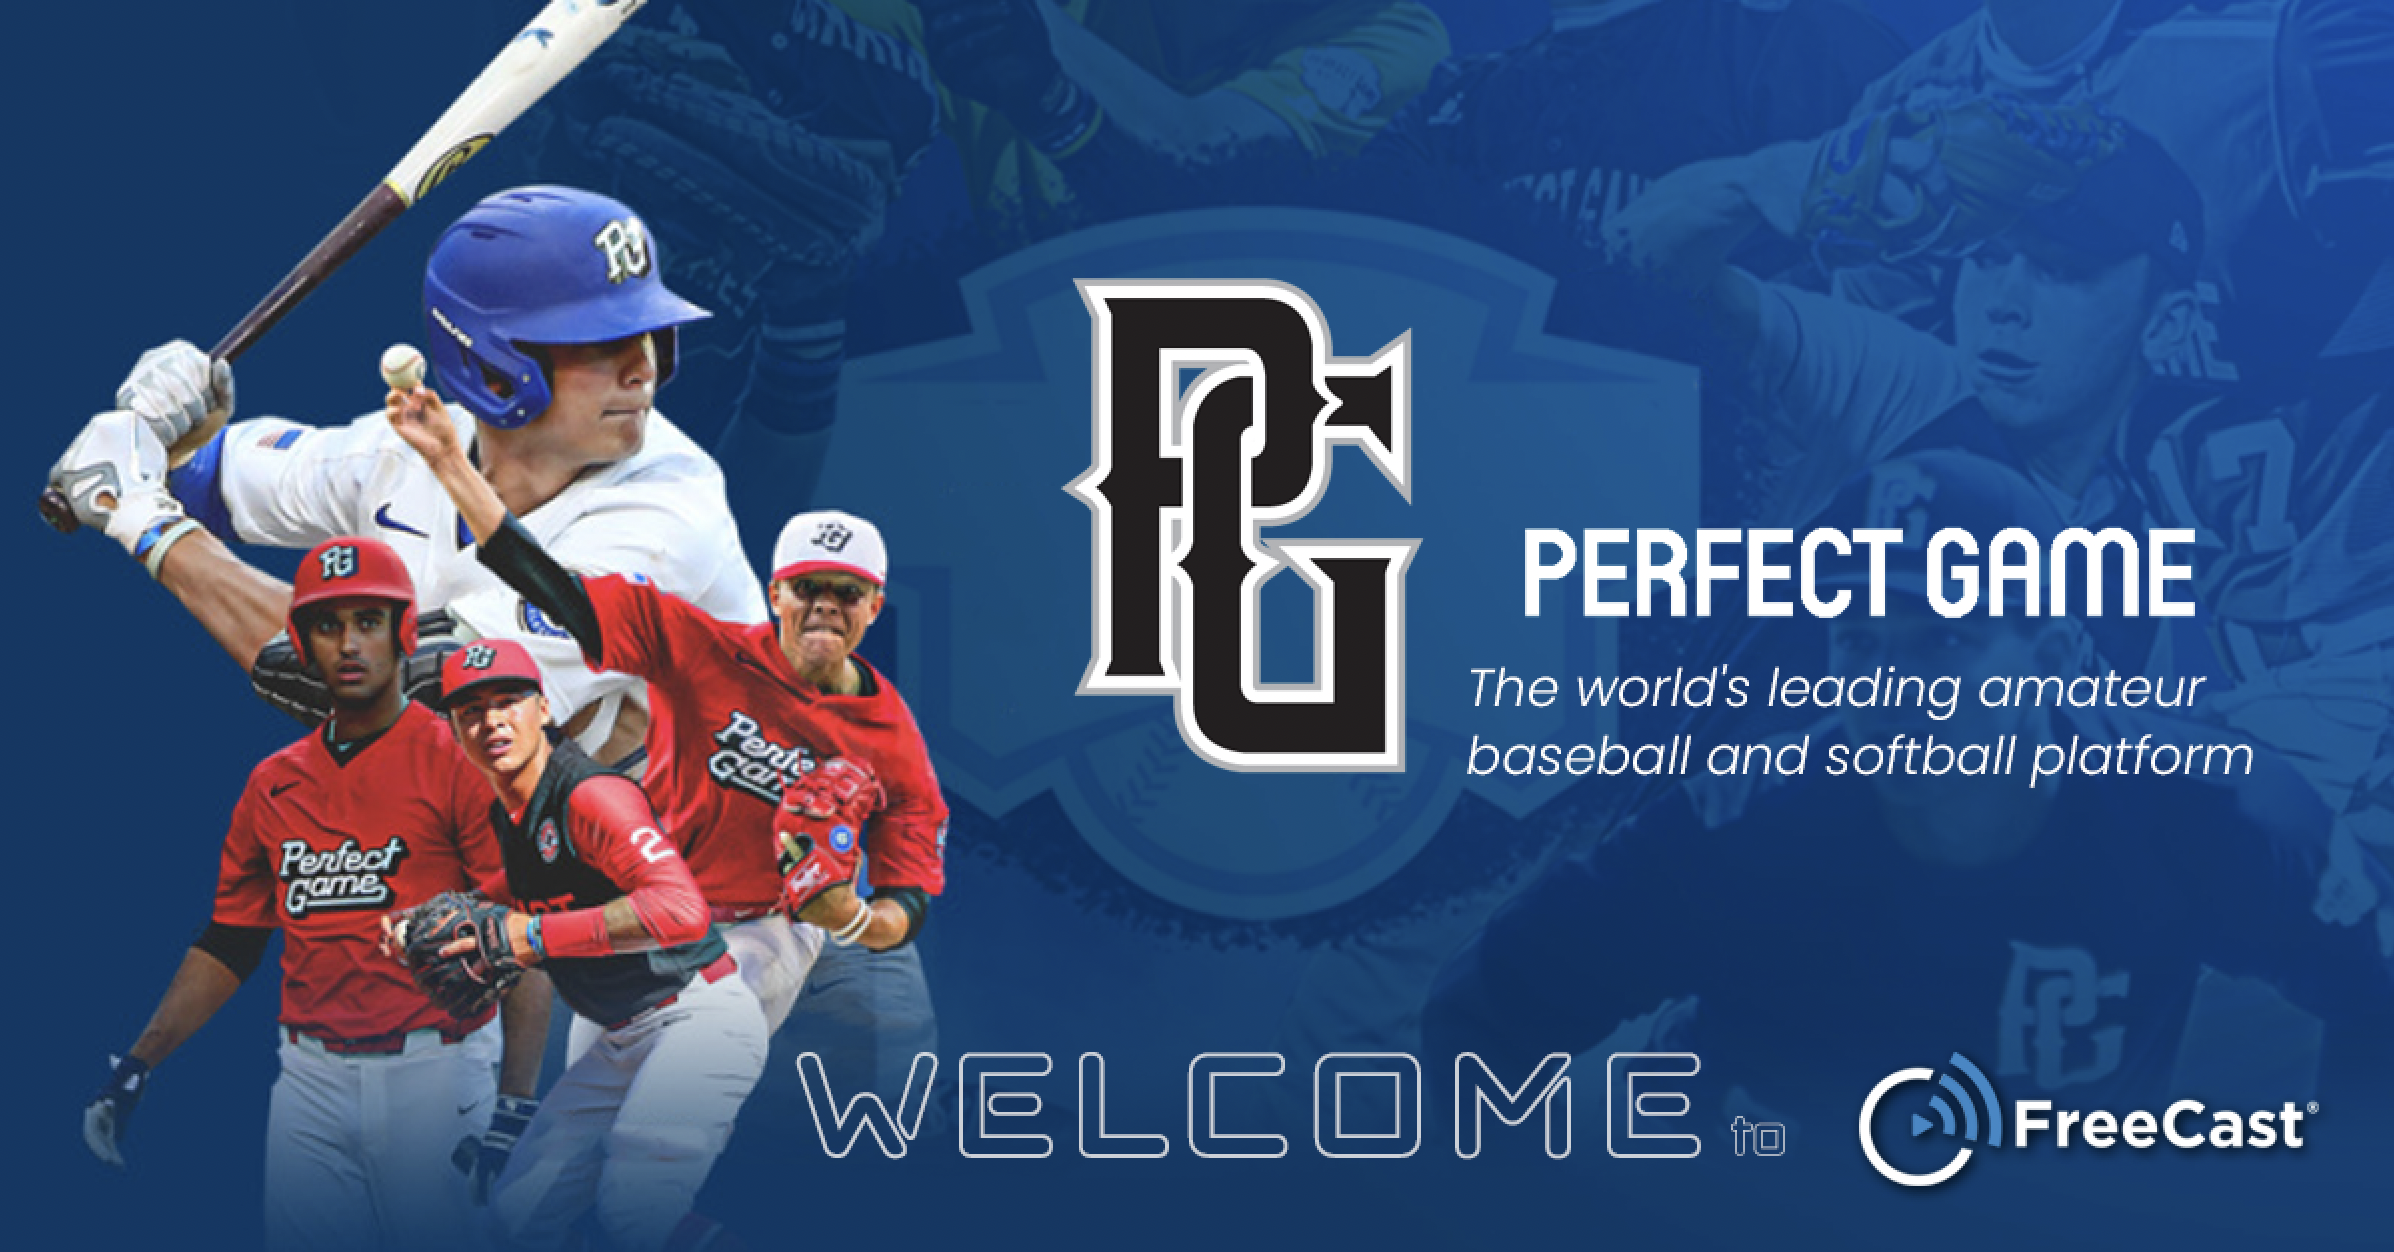 FreeCast Adds Free Baseball Channel Perfect Game TV